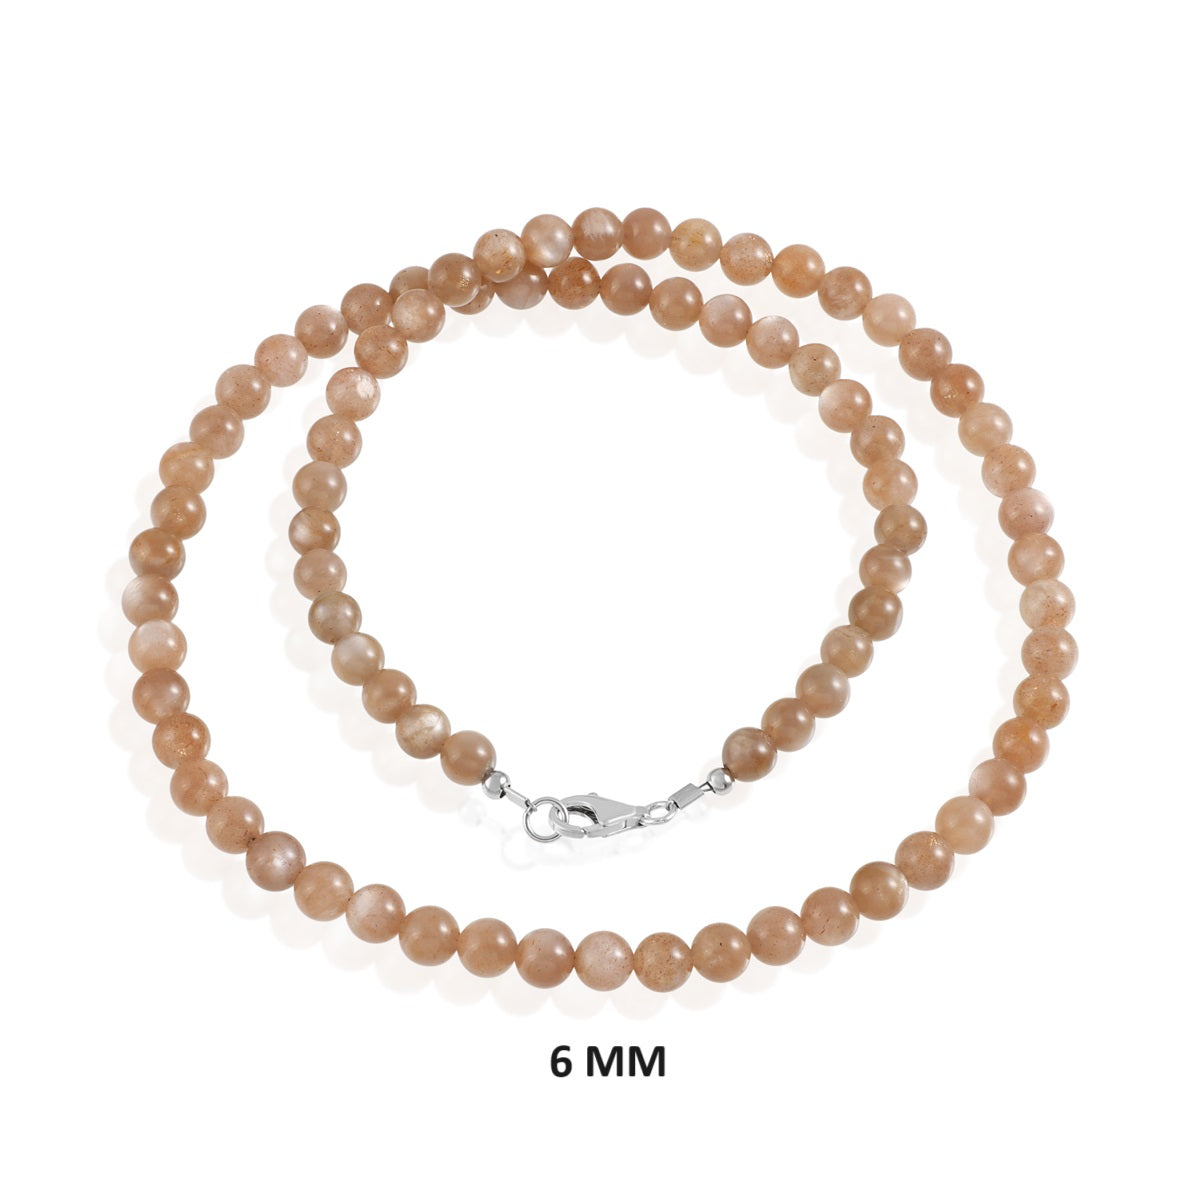 Chocolate Moonstone Beads Silver Necklace: Sophistication and Serenity